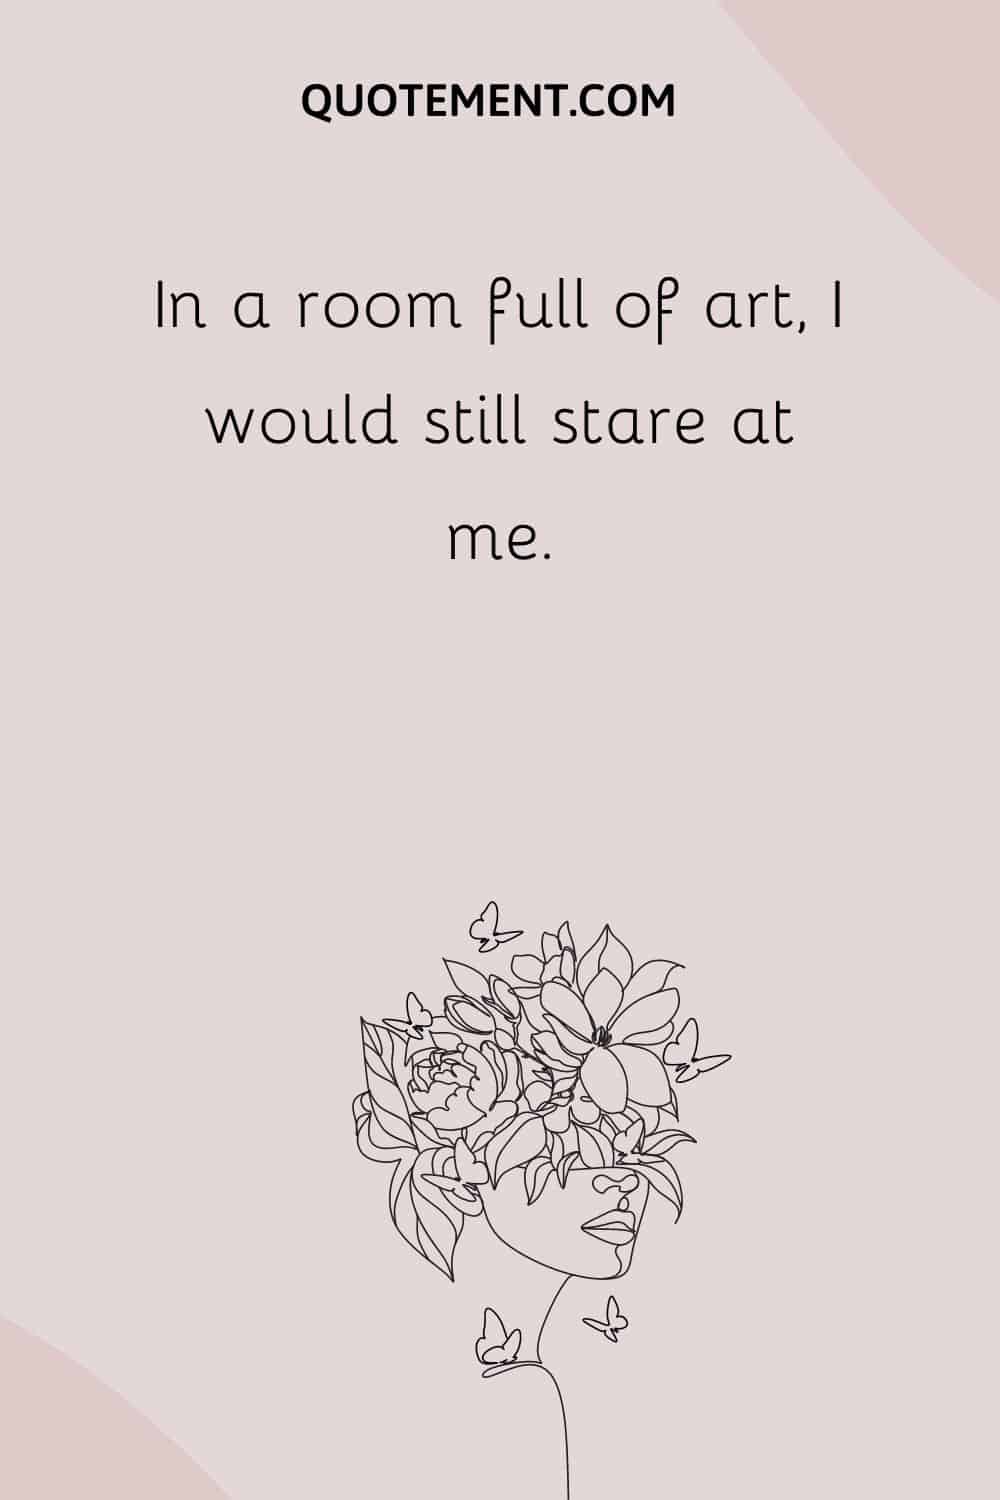 In a room full of art, I would still stare at me.